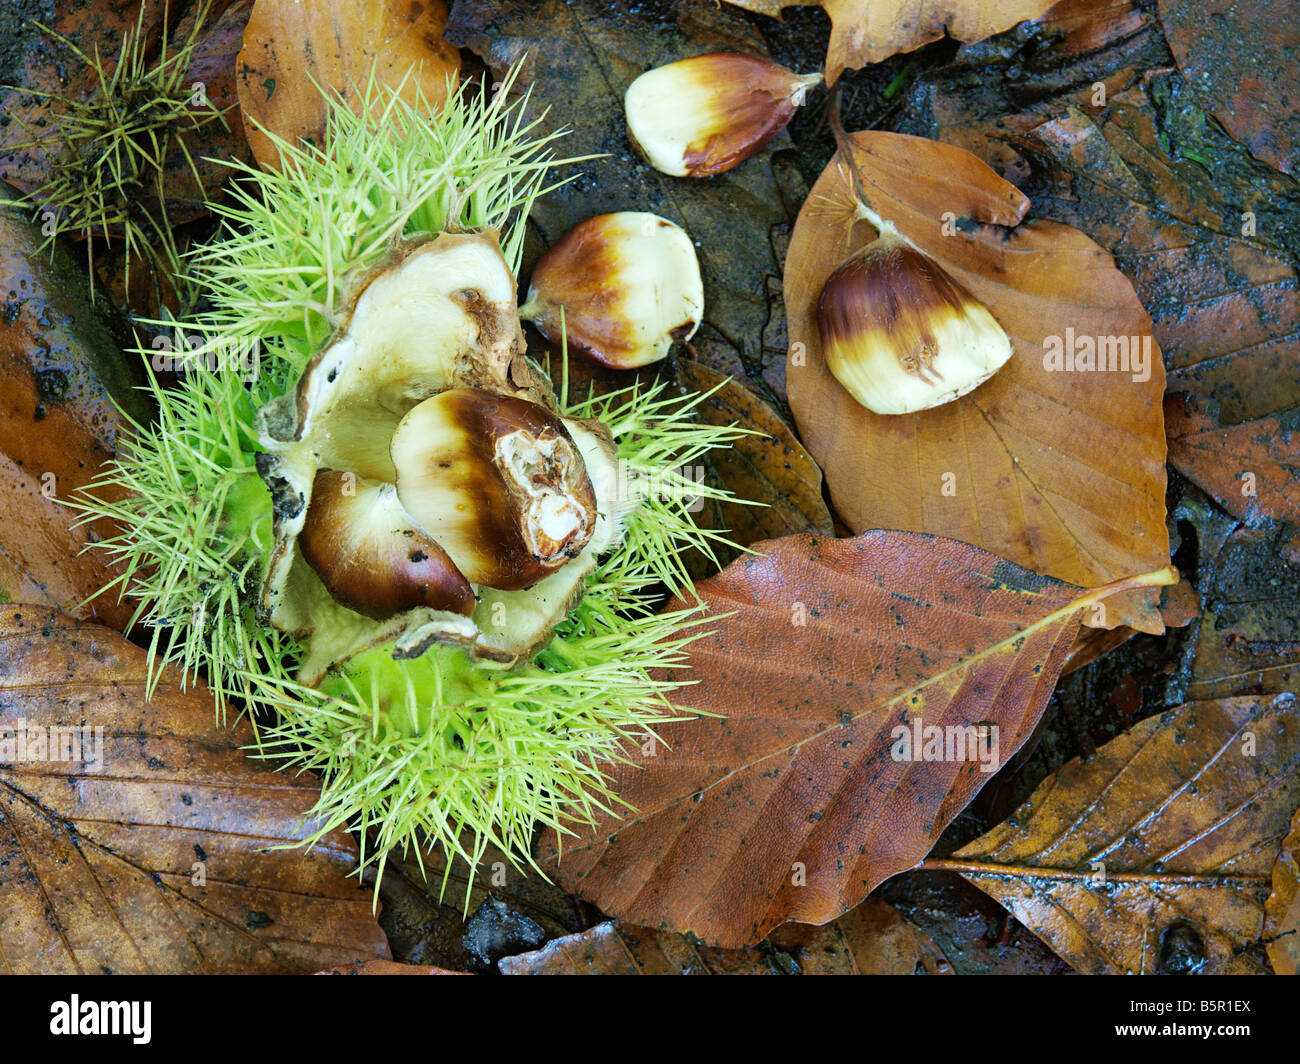 FRESHLY FALLEN CUPULE  OF SWEET CHESTNUT WITH NUTS  LYING ON WOODLAND FLOOR DURING AUTUMN, NORFOLK EAST ANGLIA ENGLAND UK Stock Photo